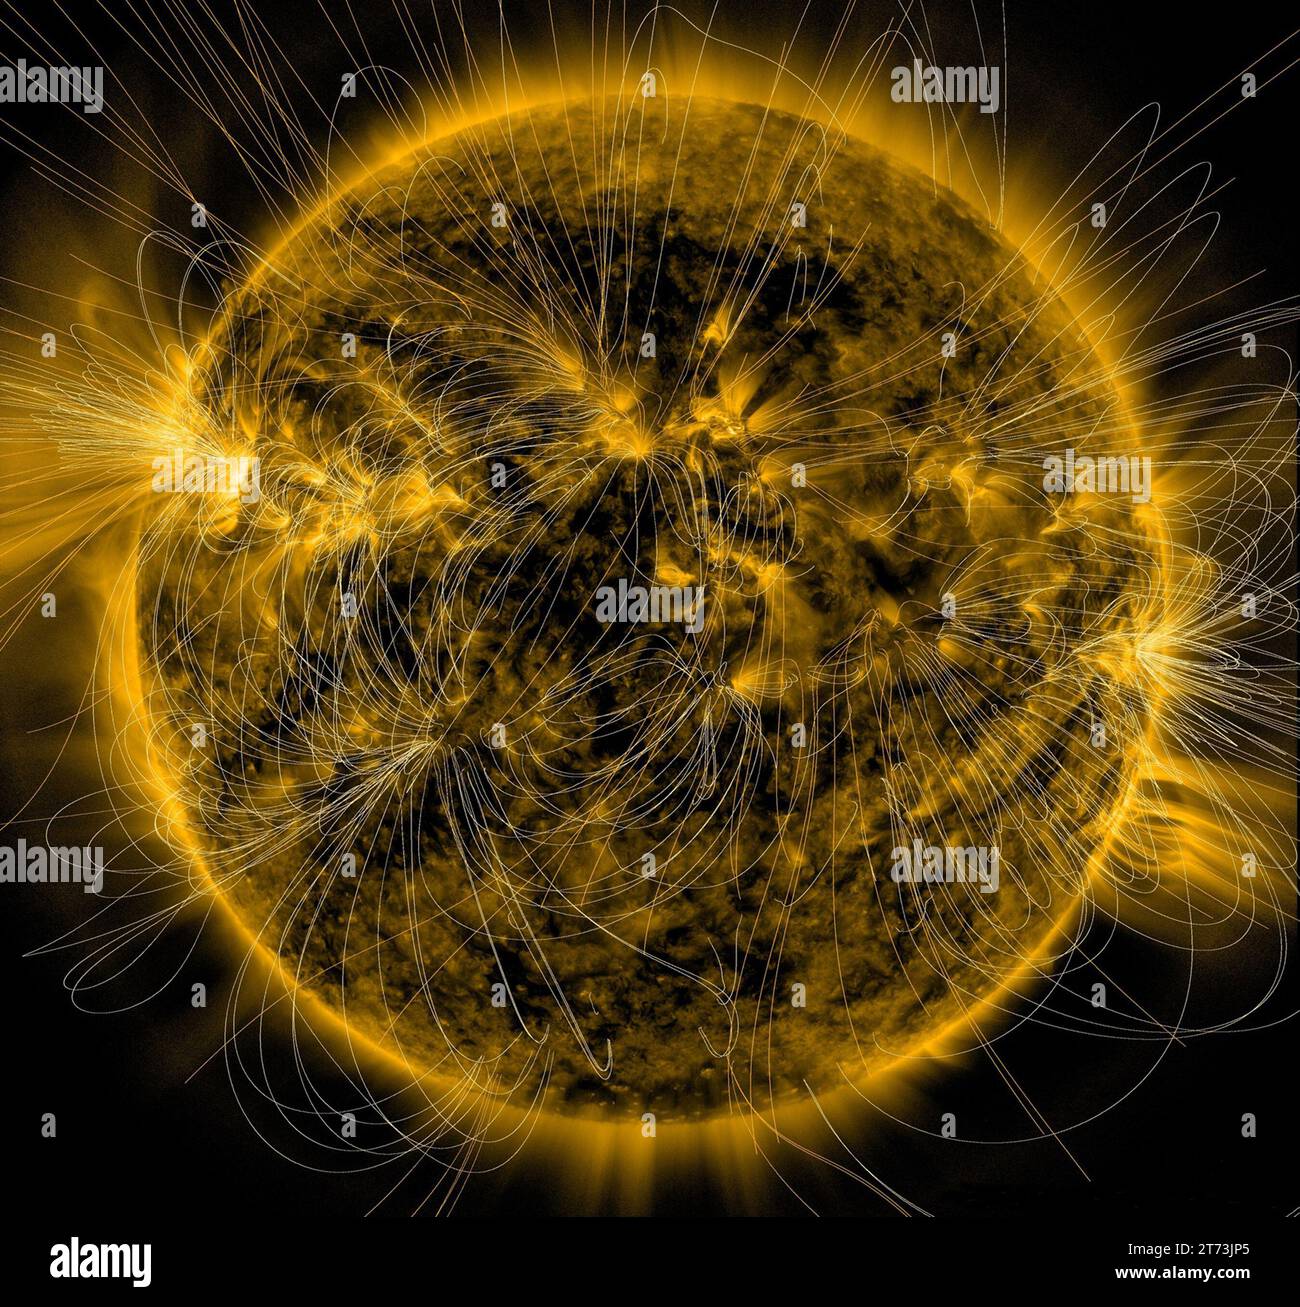 This illustration lays a depiction of the sun's magnetic fields over an image captured by NASA’s Solar Dynamics Observatory on March 12, 2016. The com Stock Photo